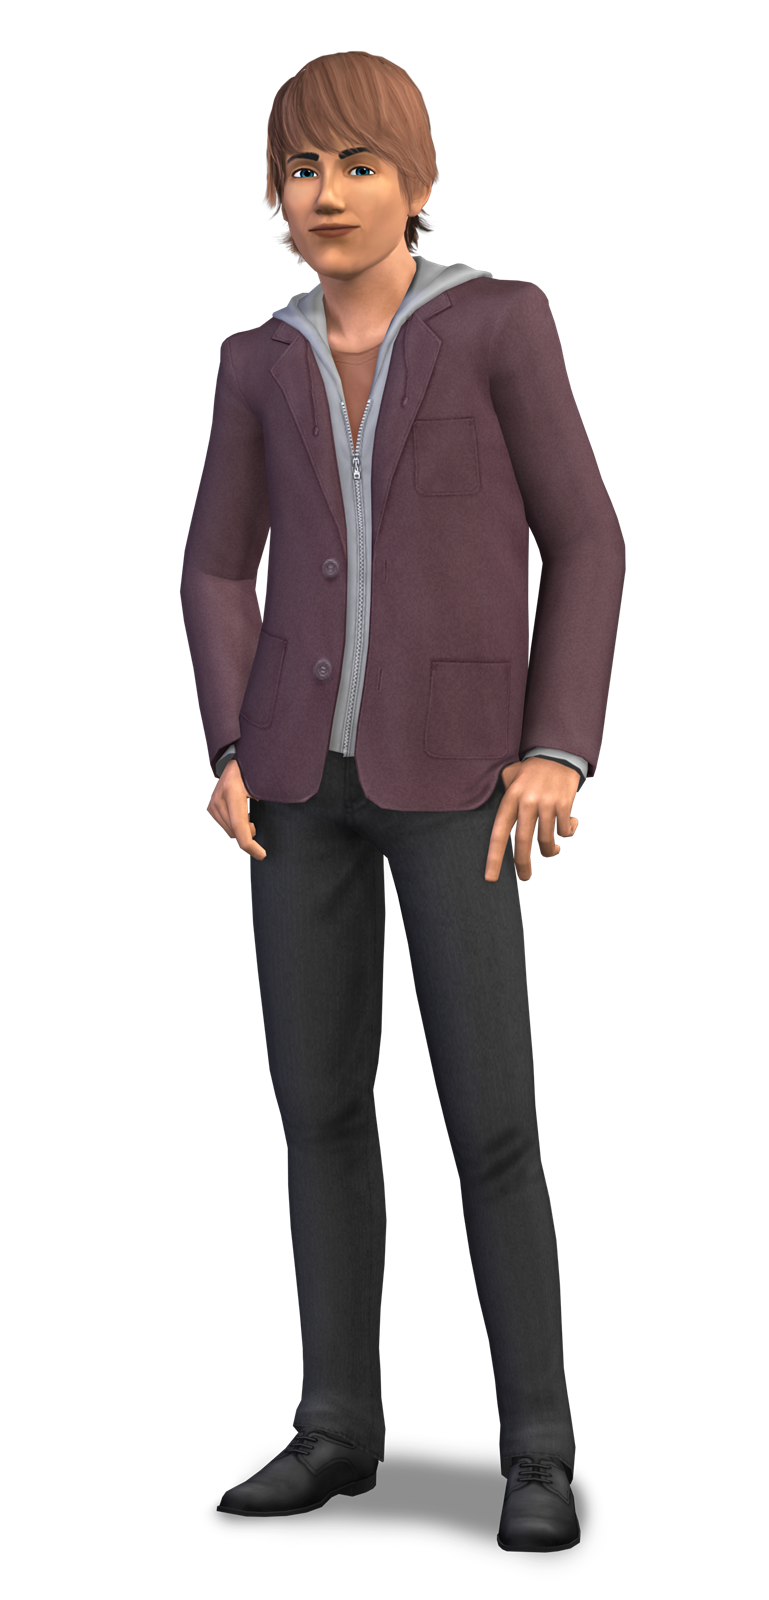 Image - TS3C Render 6.png | The Sims Wiki | FANDOM powered by Wikia